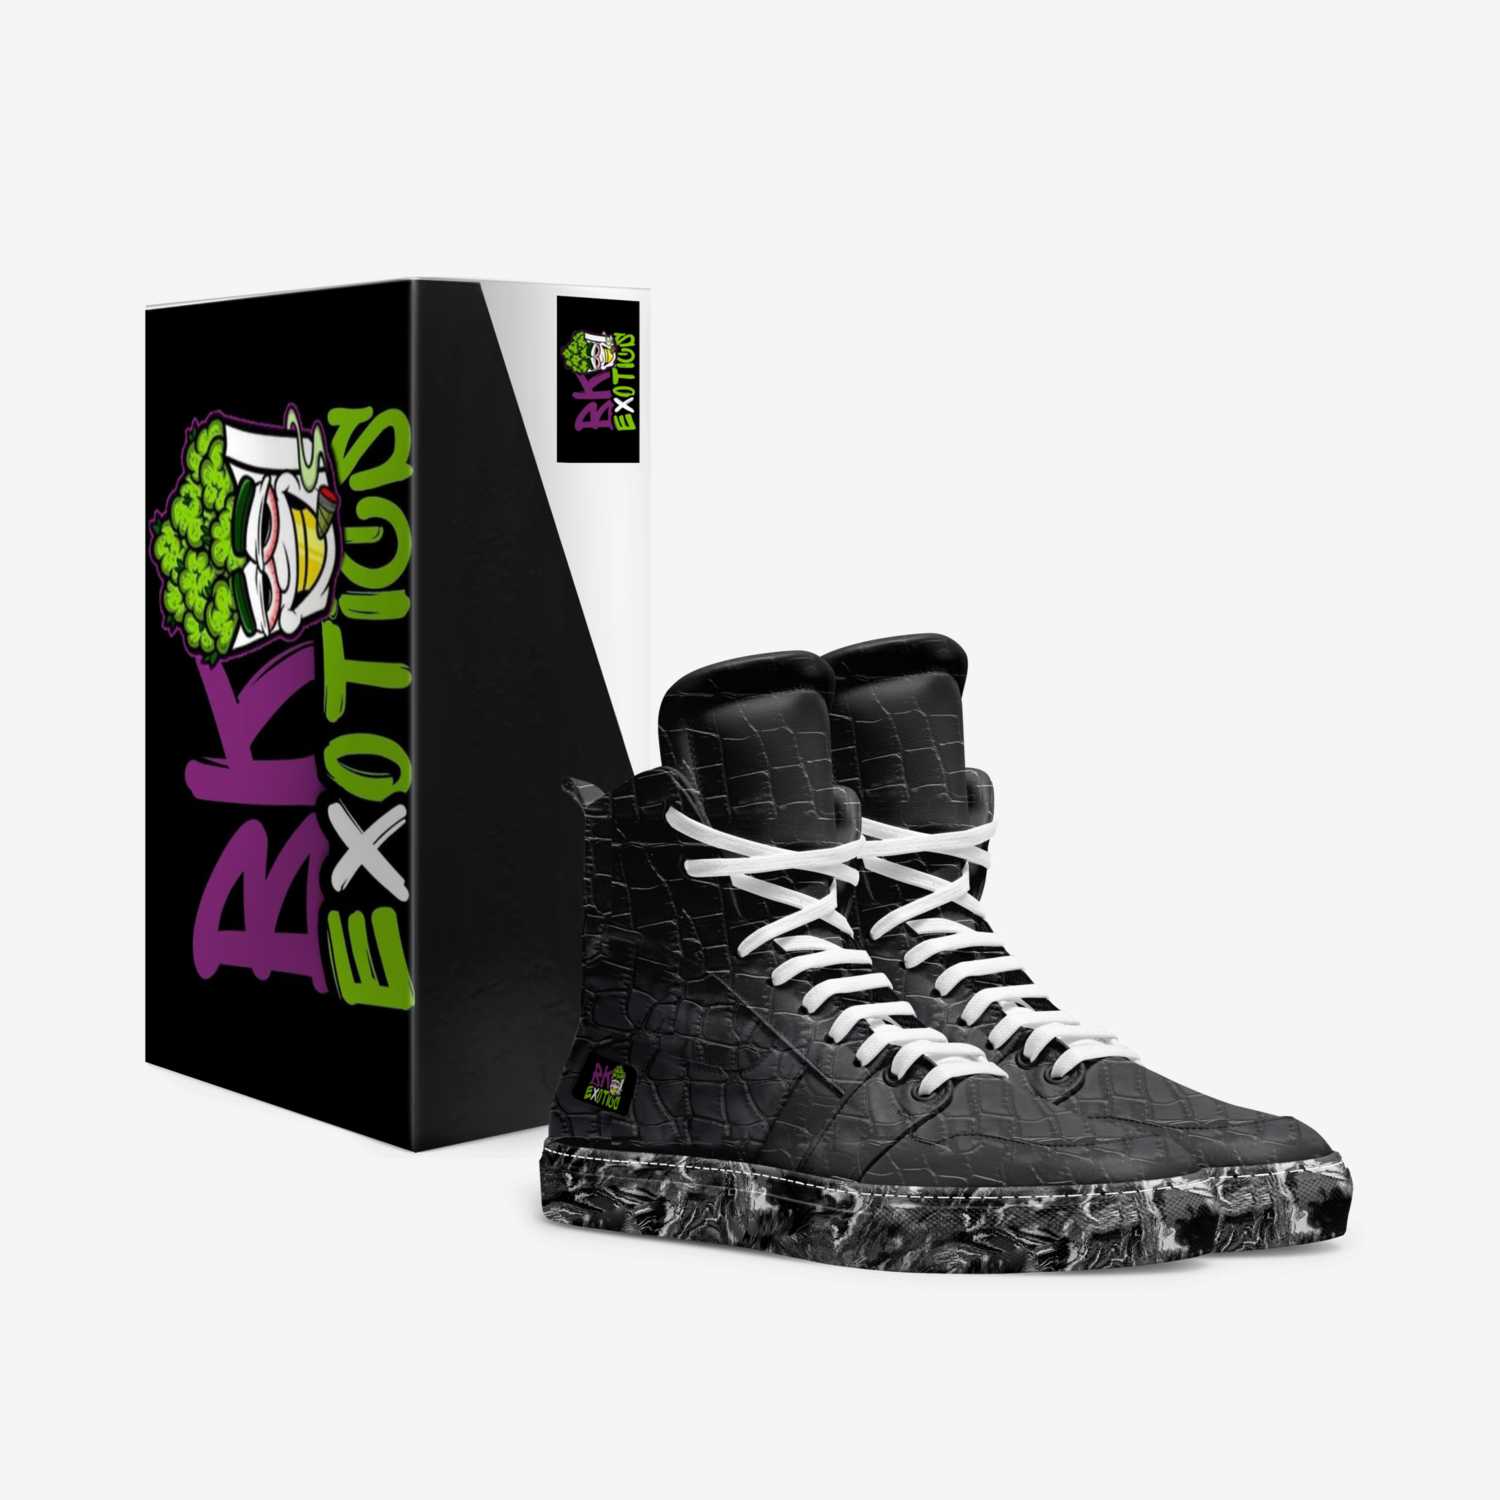 BK EXOTICS 2 custom made in Italy shoes by Donovan Lowe | Box view